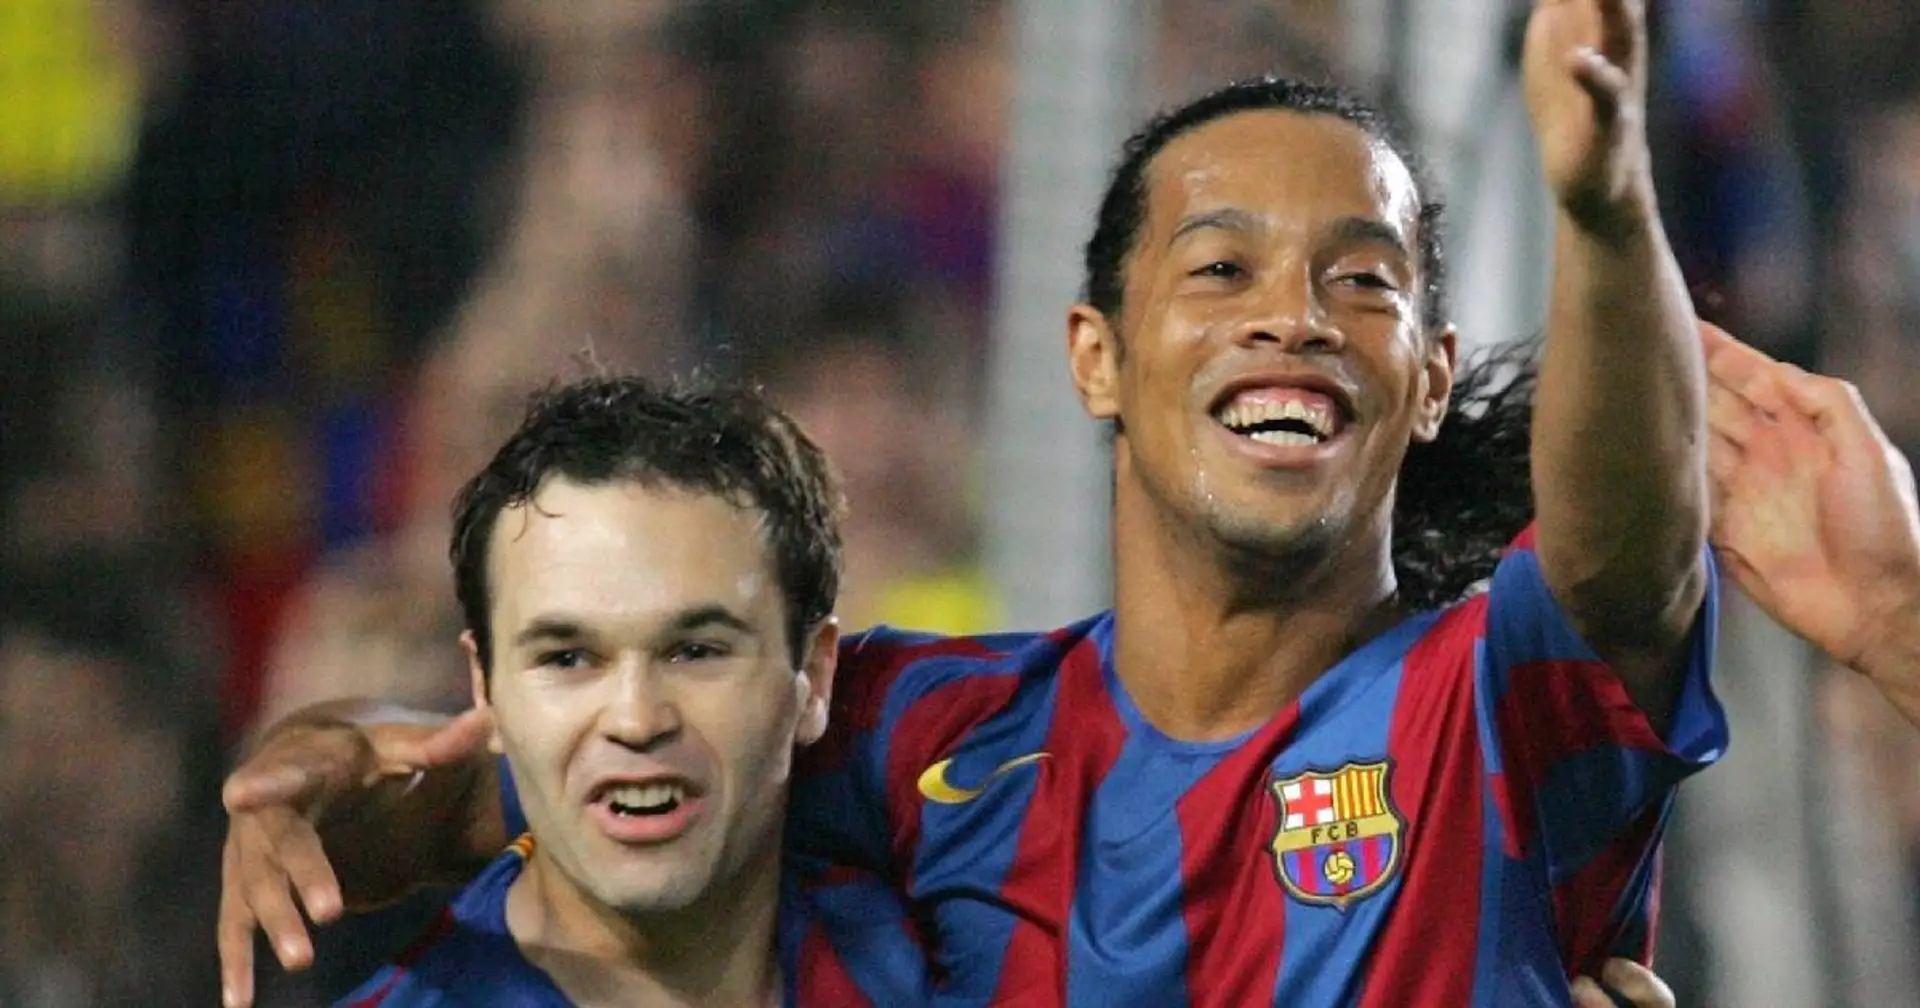 'Andres, in June I will join Real Madrid. Please don't tell anyone': How Ronaldinho's unbelievable mind-game trick prepared Barca for thrashing Madrid in 2005